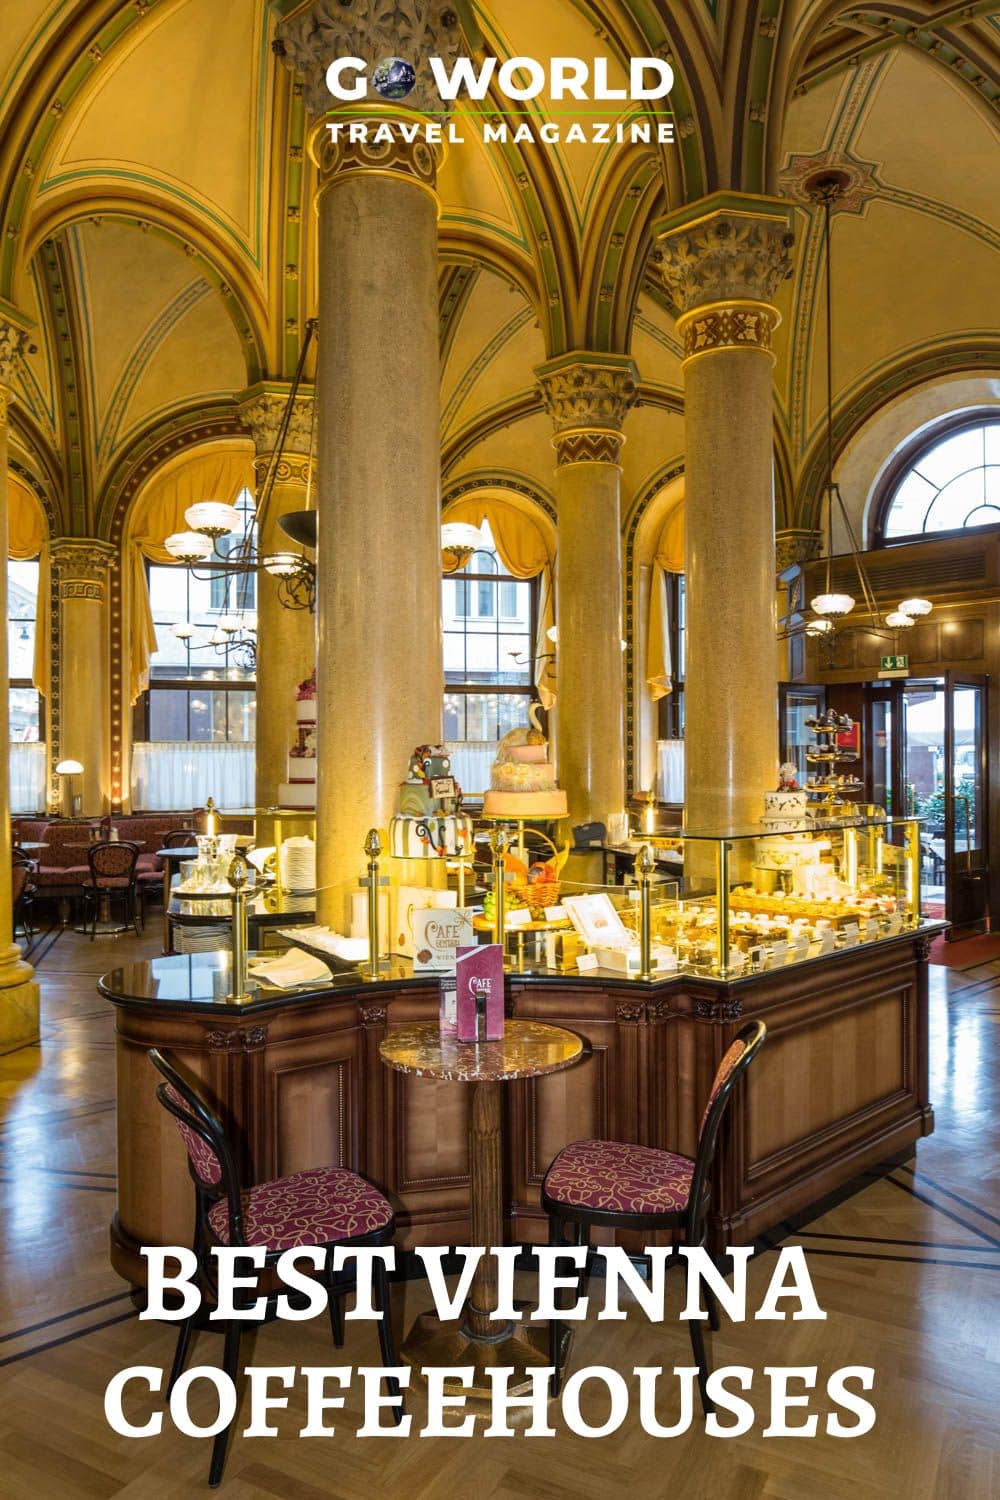 Vienna’s coffeehouse culture offers a chance to slow down, savor life and enjoy the best coffee in Vienna with the company of friends. #Viennacoffee #viennacafes